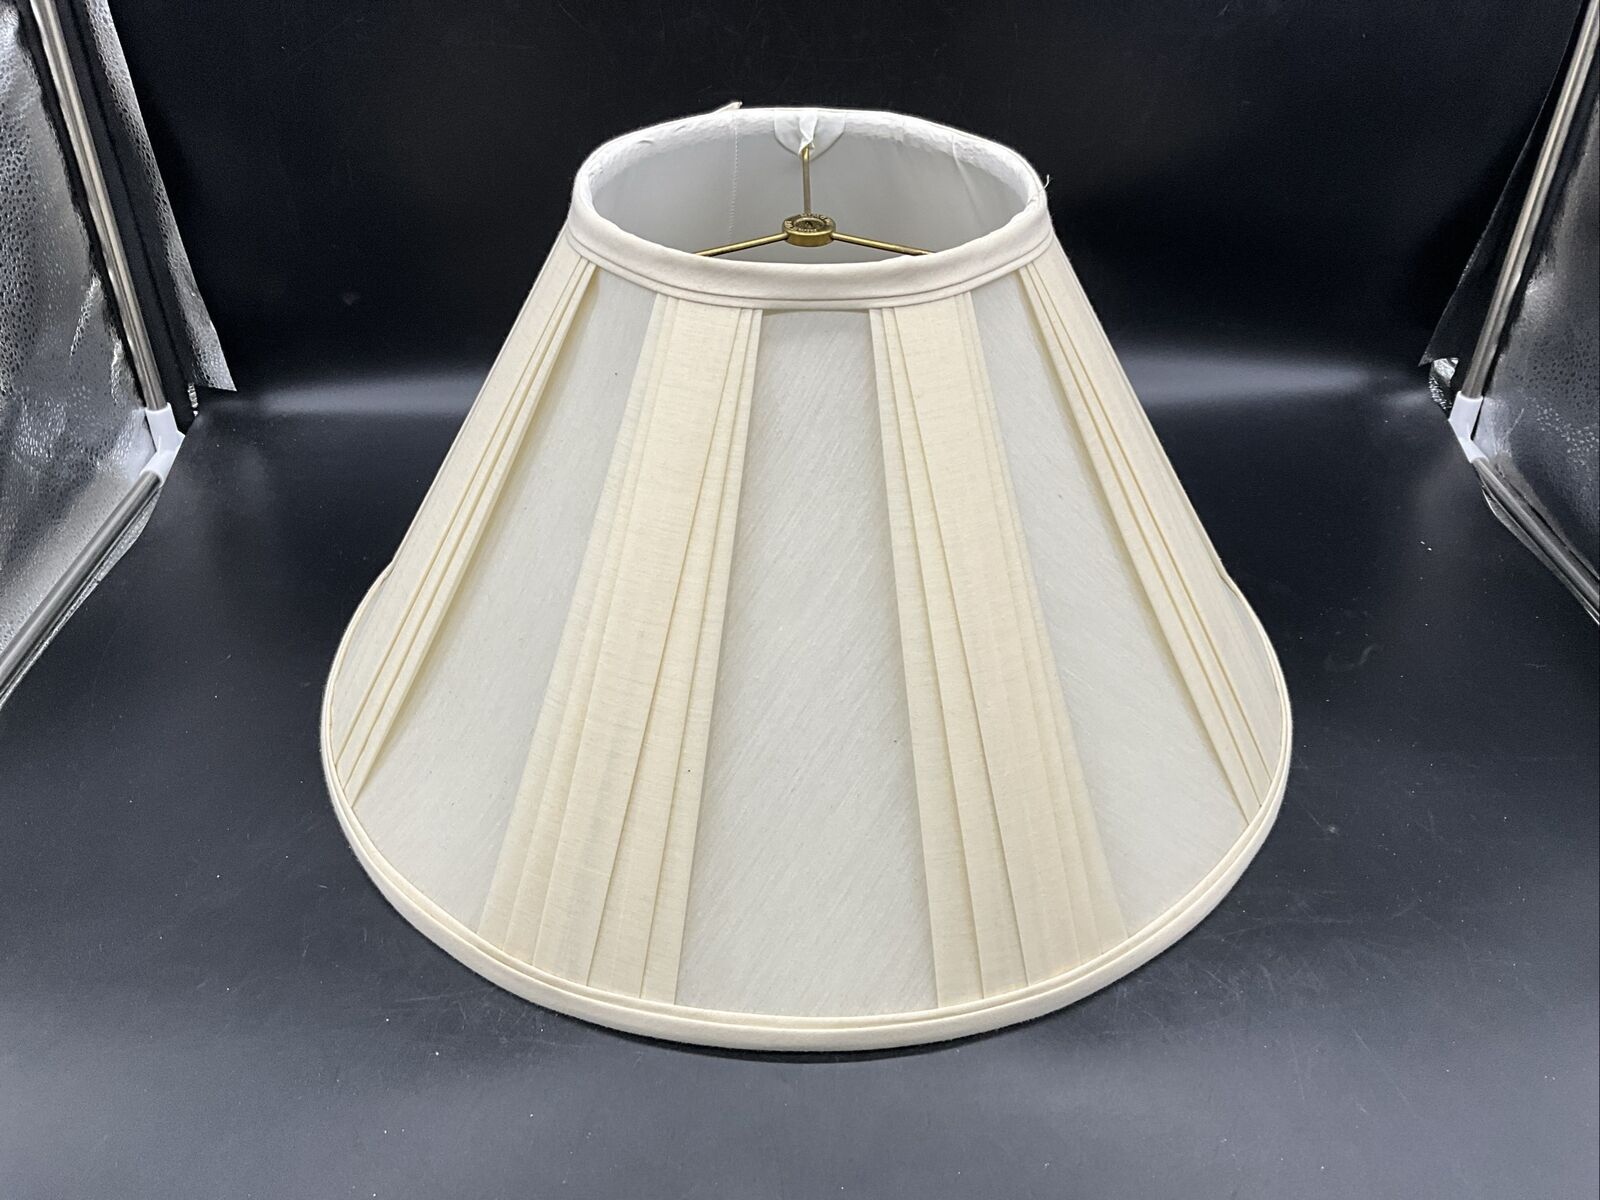 VTG Baldwin Lampshade *Few Spots On It Per The Pictures